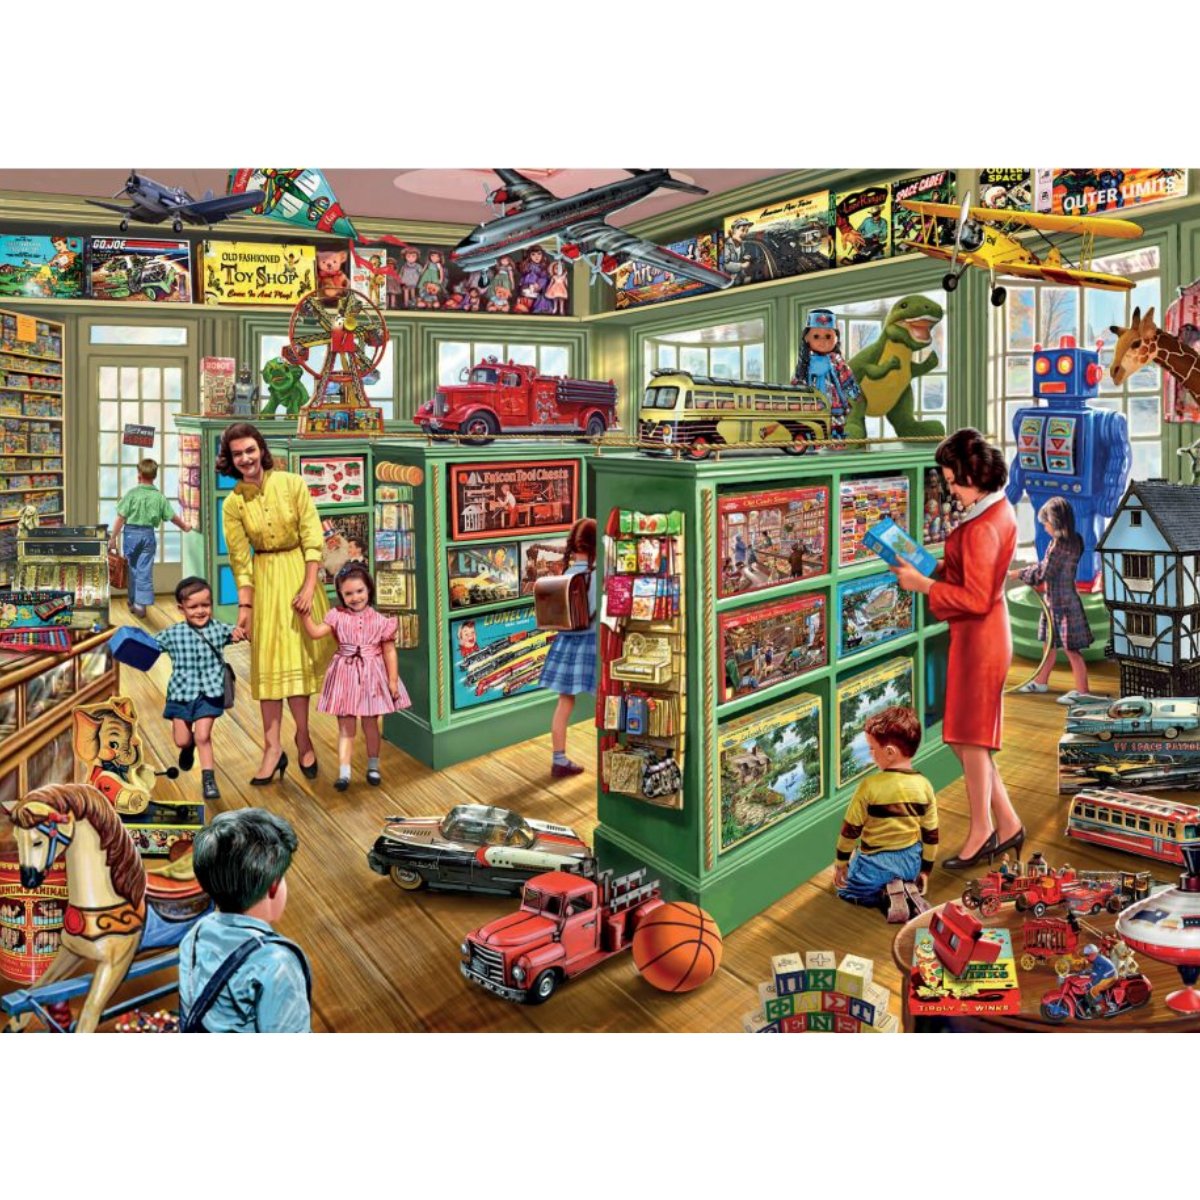 Ye Olde Toy Shoppe Jigsaw Puzzle (1000 Pieces) - Phillips Hobbies